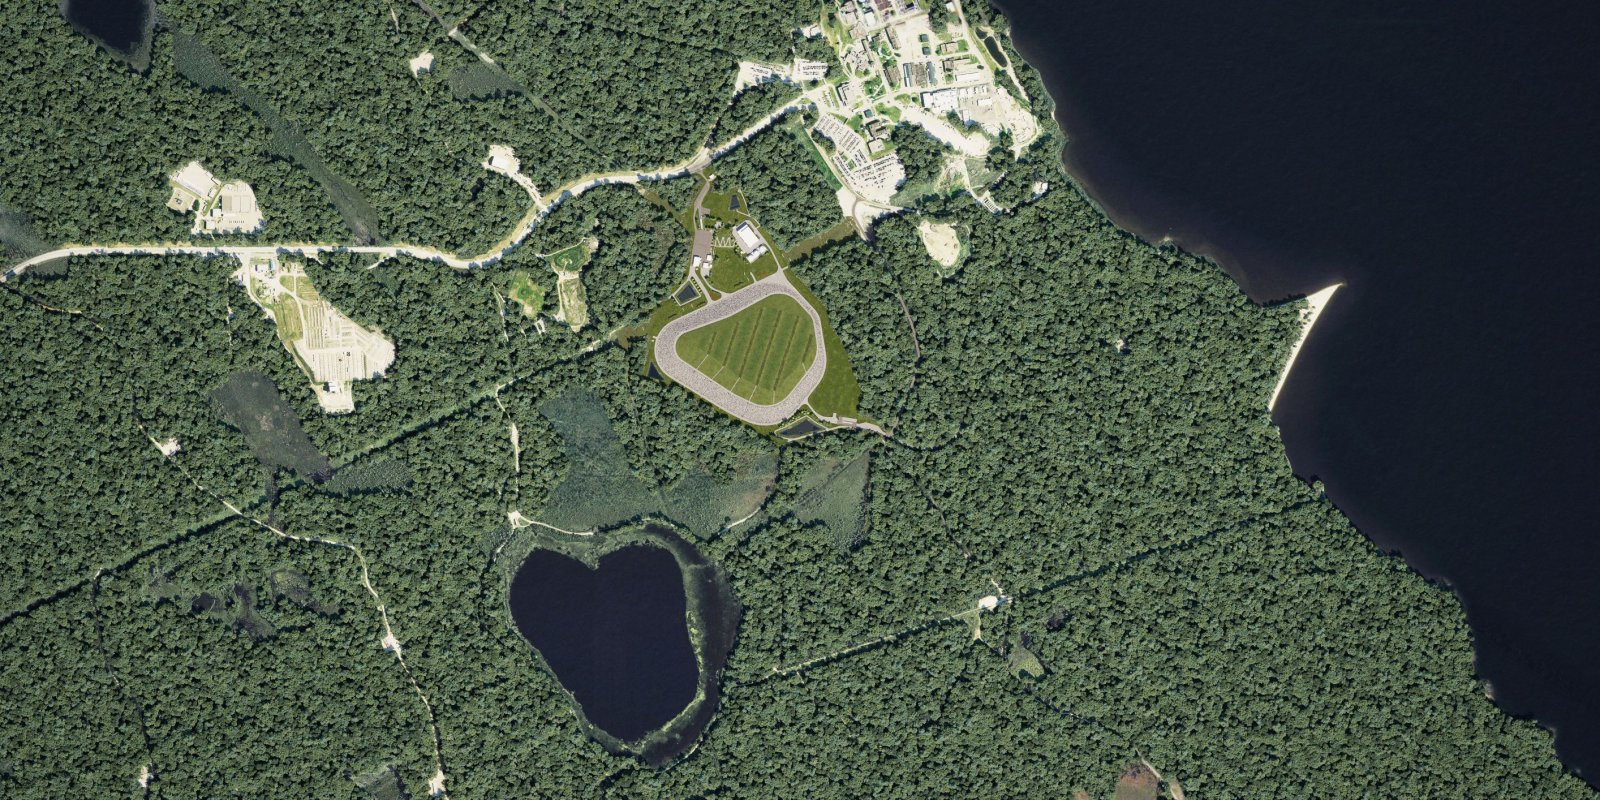 A rendering of the proposed near-surface disposal facility at Chalk River. This is not a photograph, it is a rendering  of what the proposed facility will look like, provided by CNL